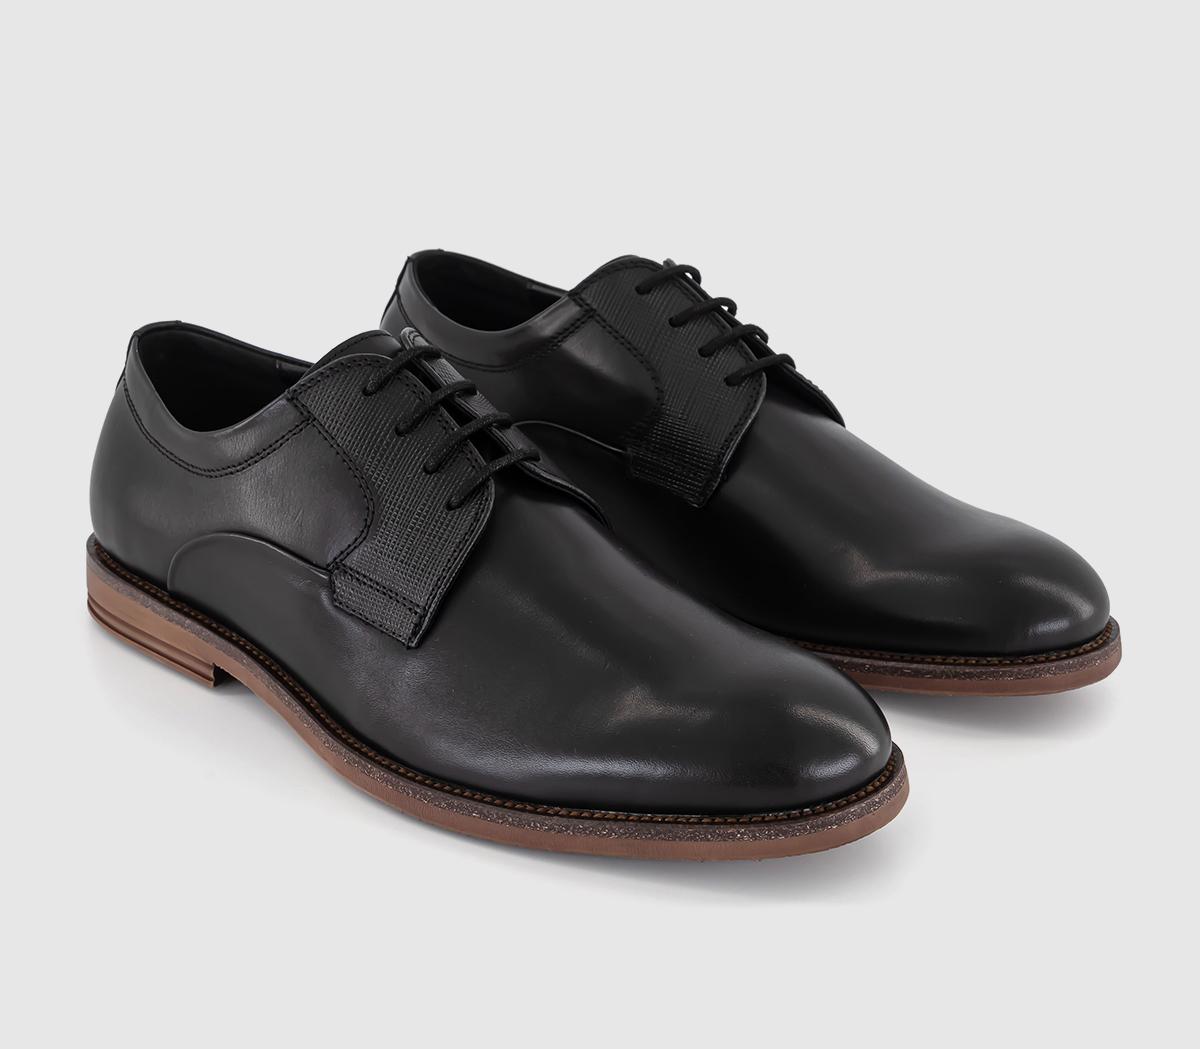 OFFICE Matteo Embossed Flexi Sole Derby Shoes Black Leather, 8